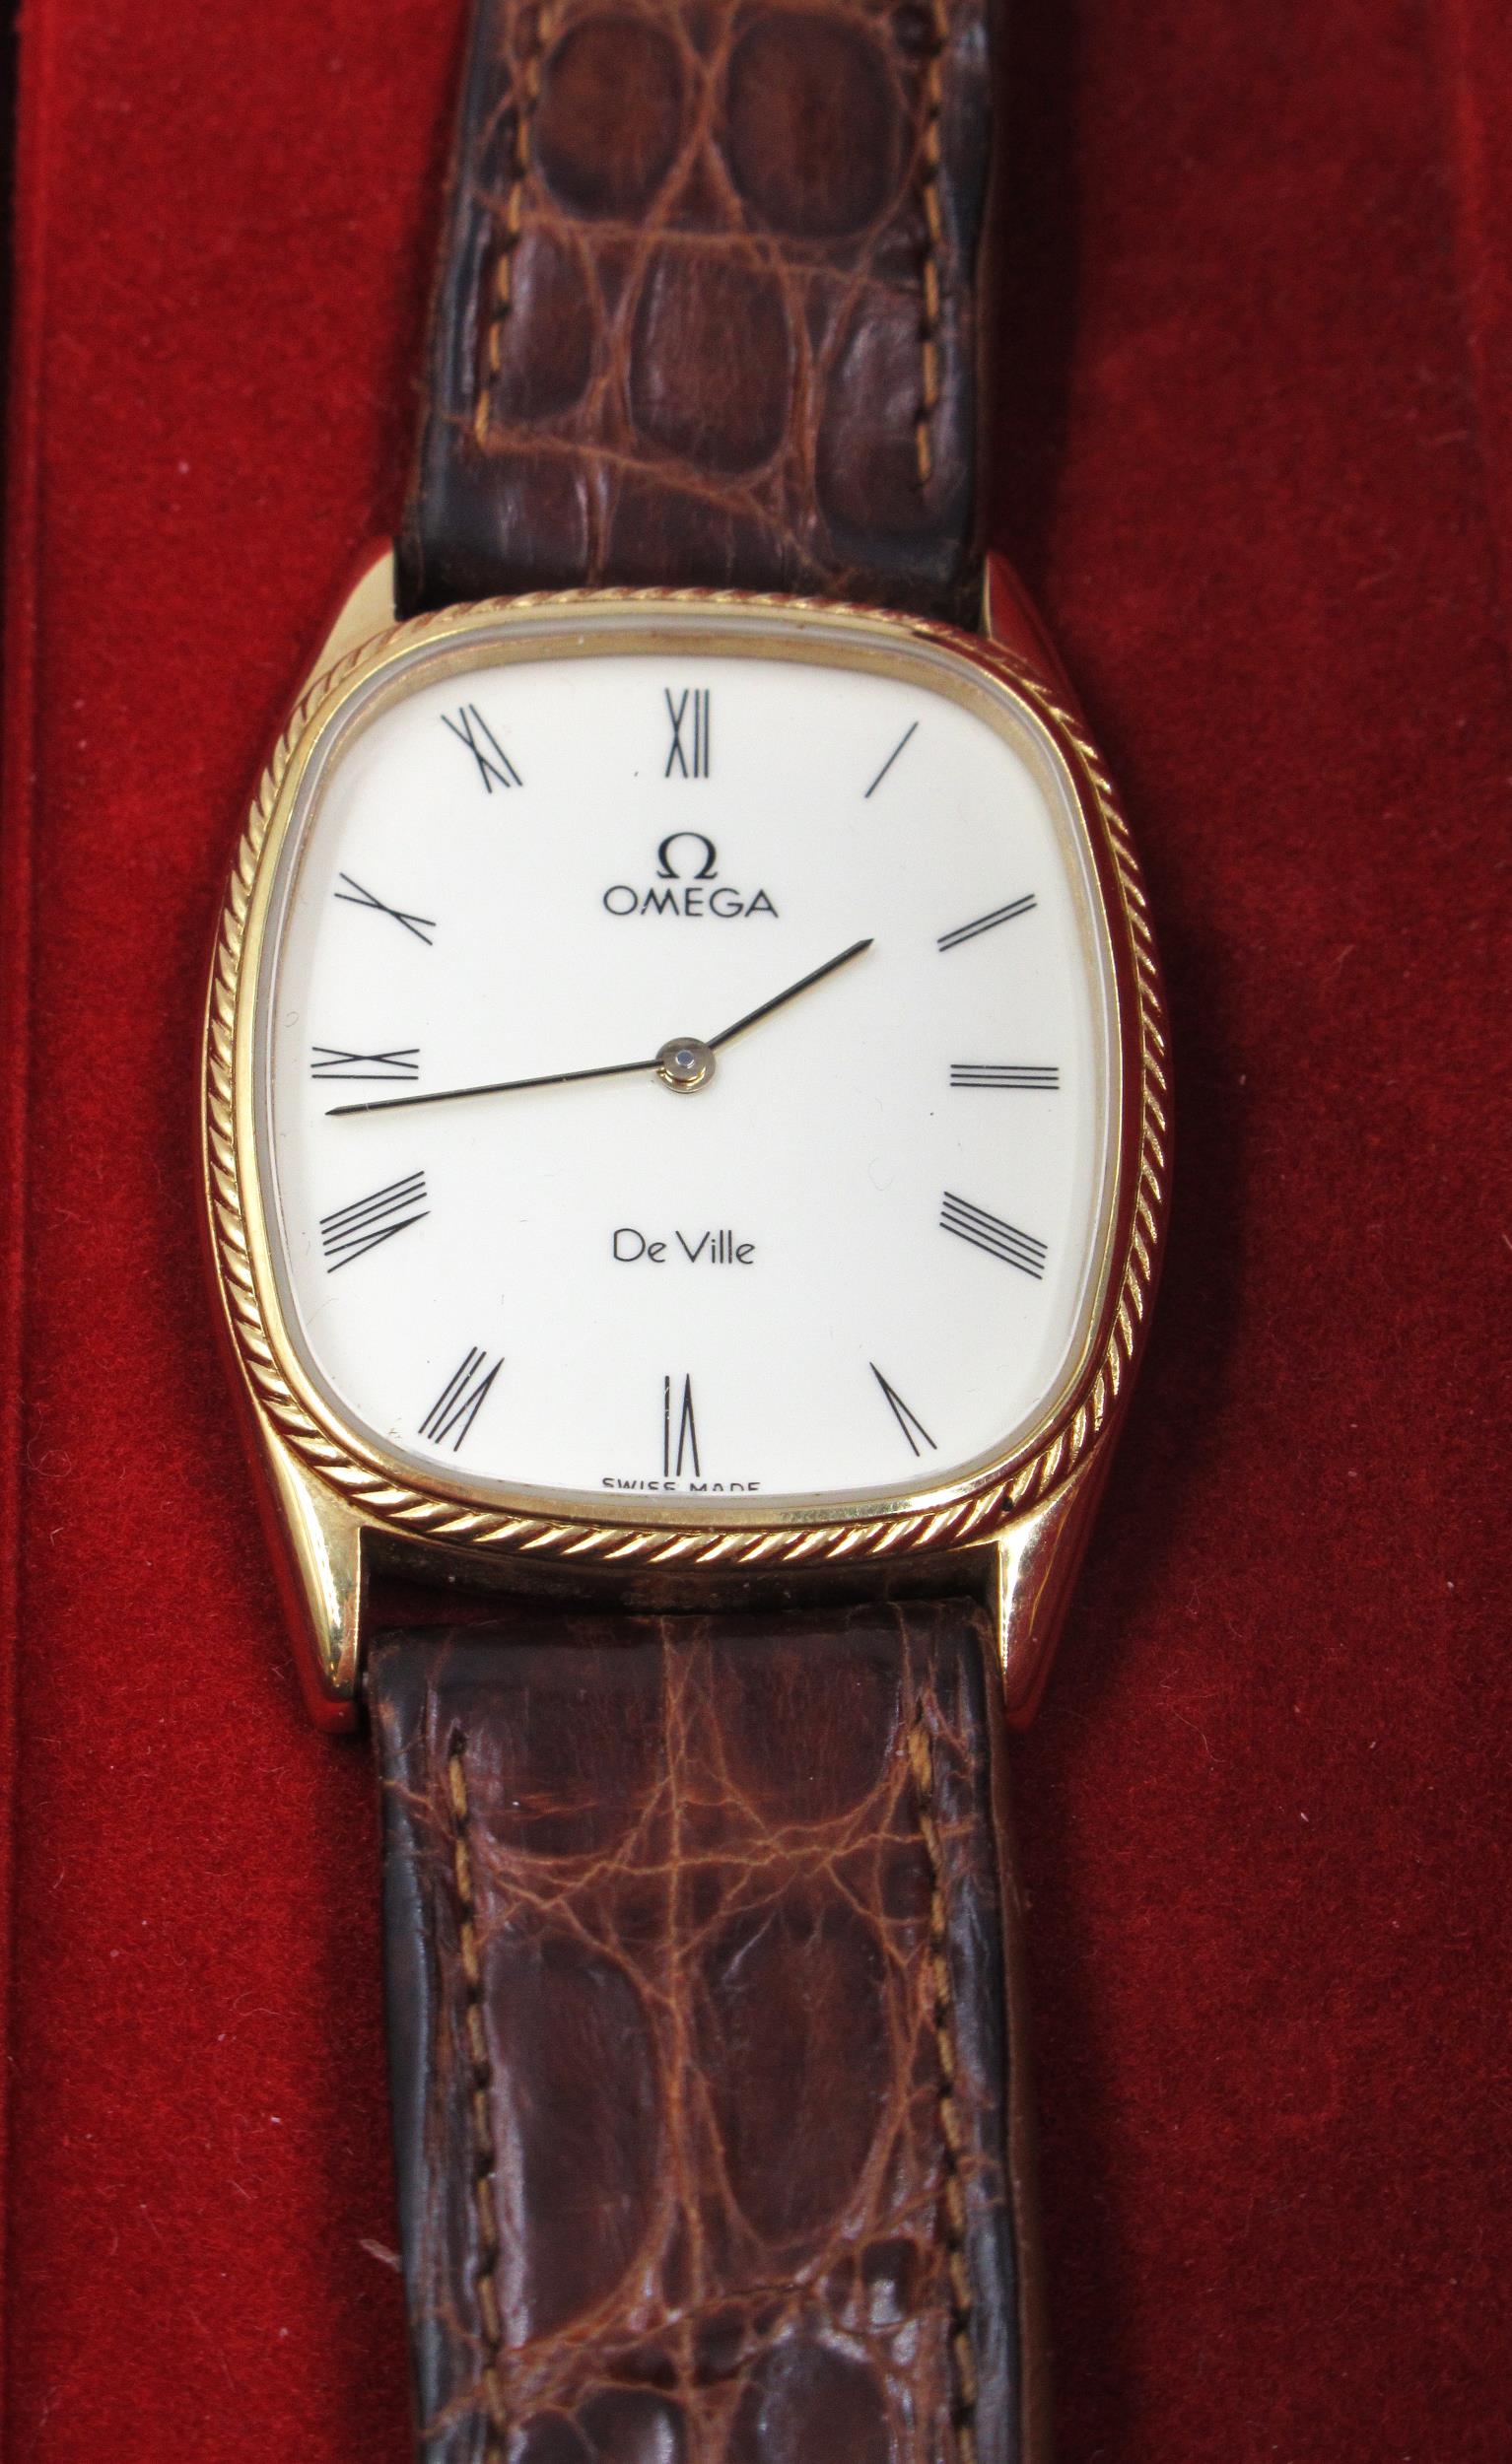 Omega De Ville ladies gold plated quartz wristwatch with brown leather strap, in original box with - Image 2 of 2